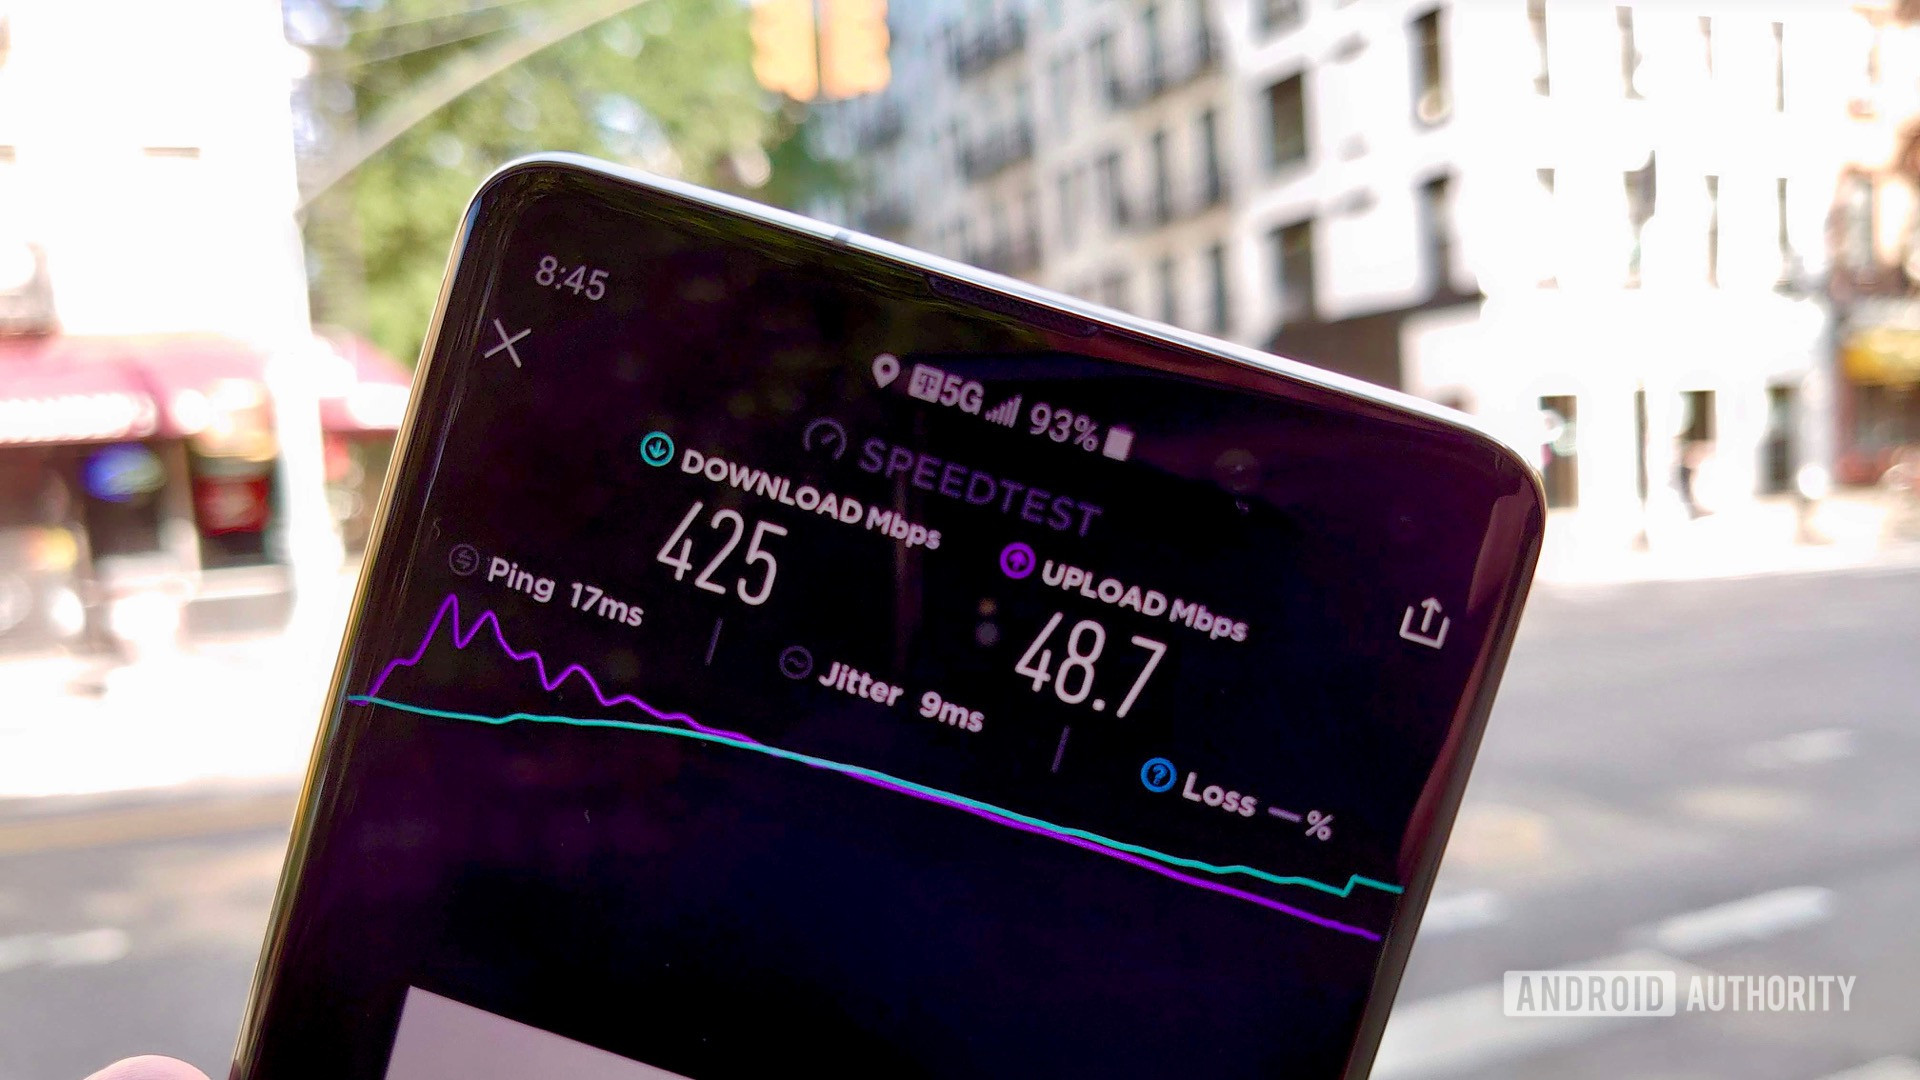 T-mobile 5g speed test results